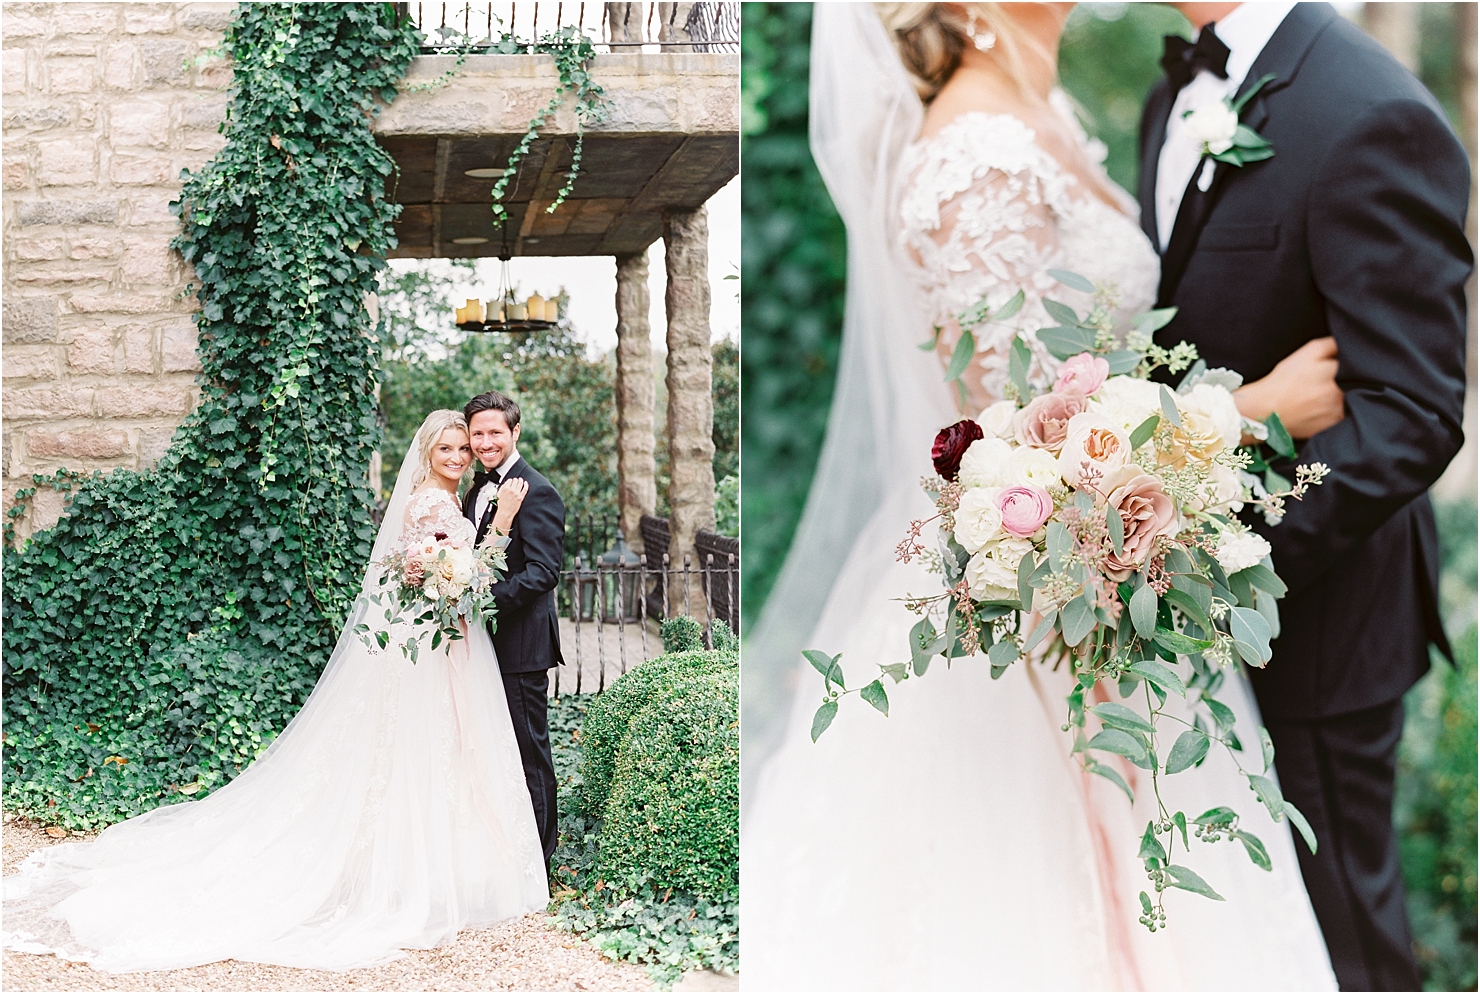 Bride and Groom Evelyn Bridal Gown English Ivy French Balcony Architecture Chateau Chateau Selah Madeline Trent Romantic Wedding Photographer